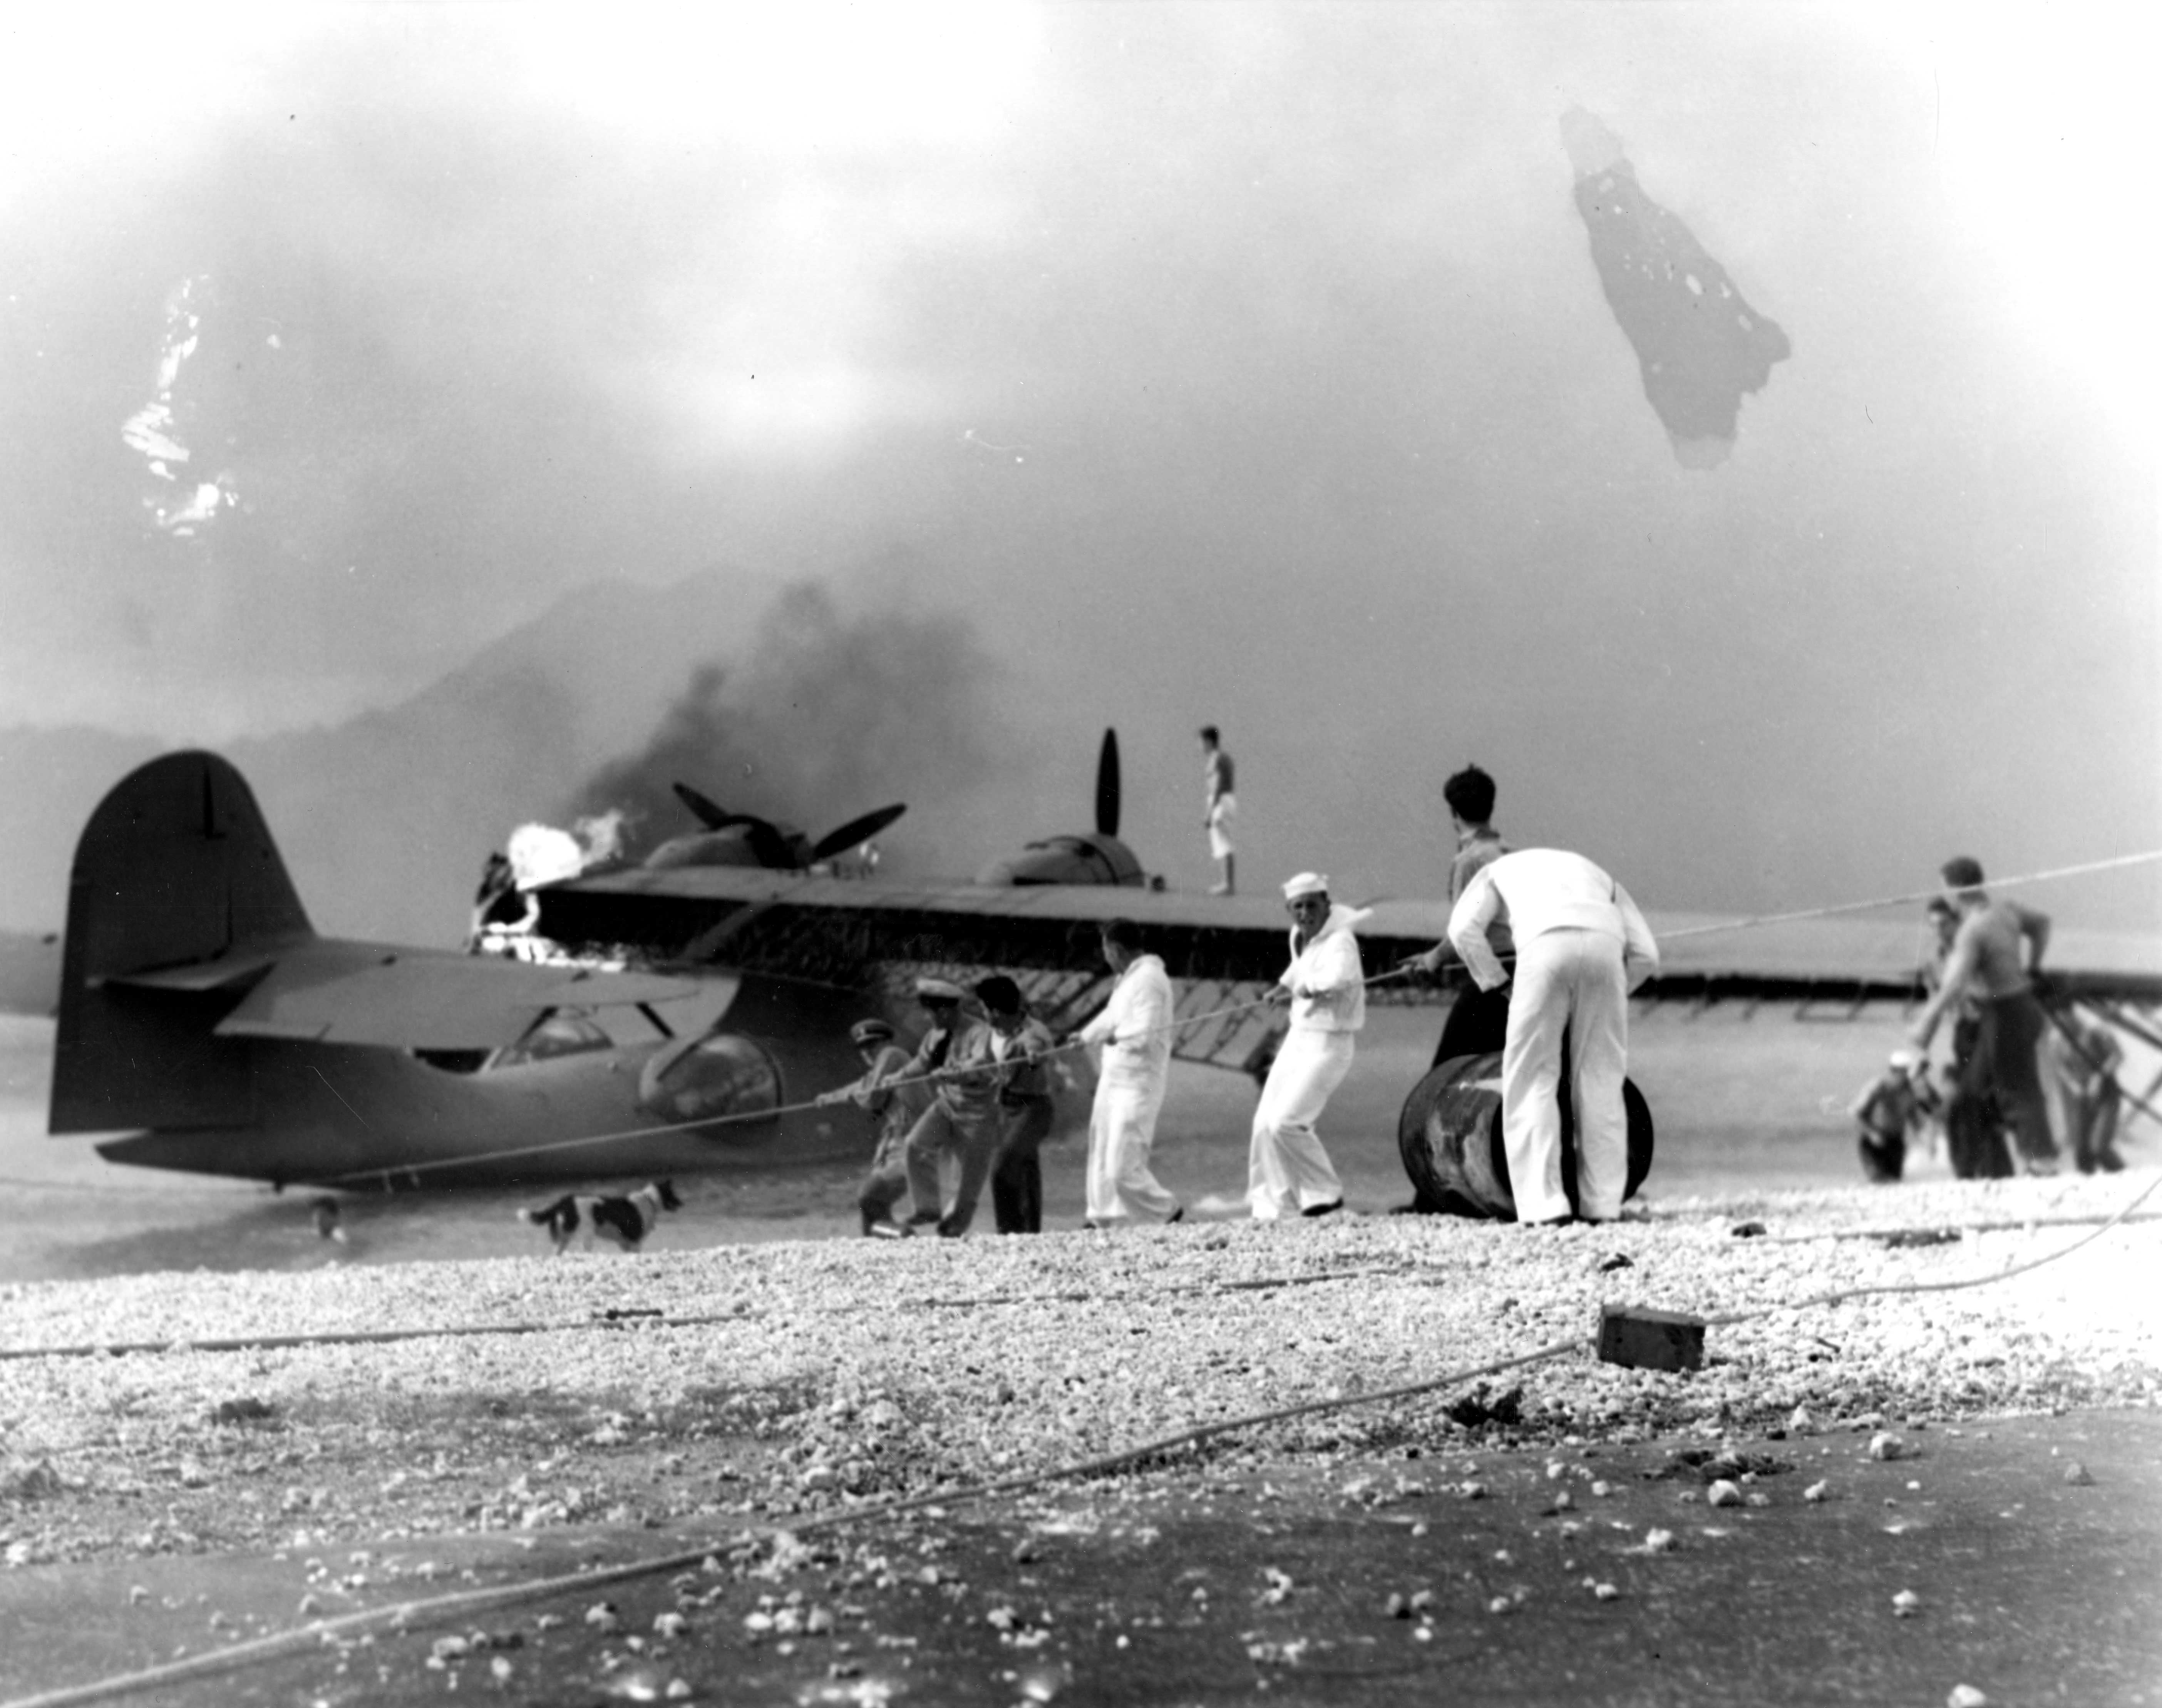 Sailors attempt to save a burning amphibious aircraft at during the Japanese attack on Pearl Harbor. (Photo: Handout/Reuters/Newscom)